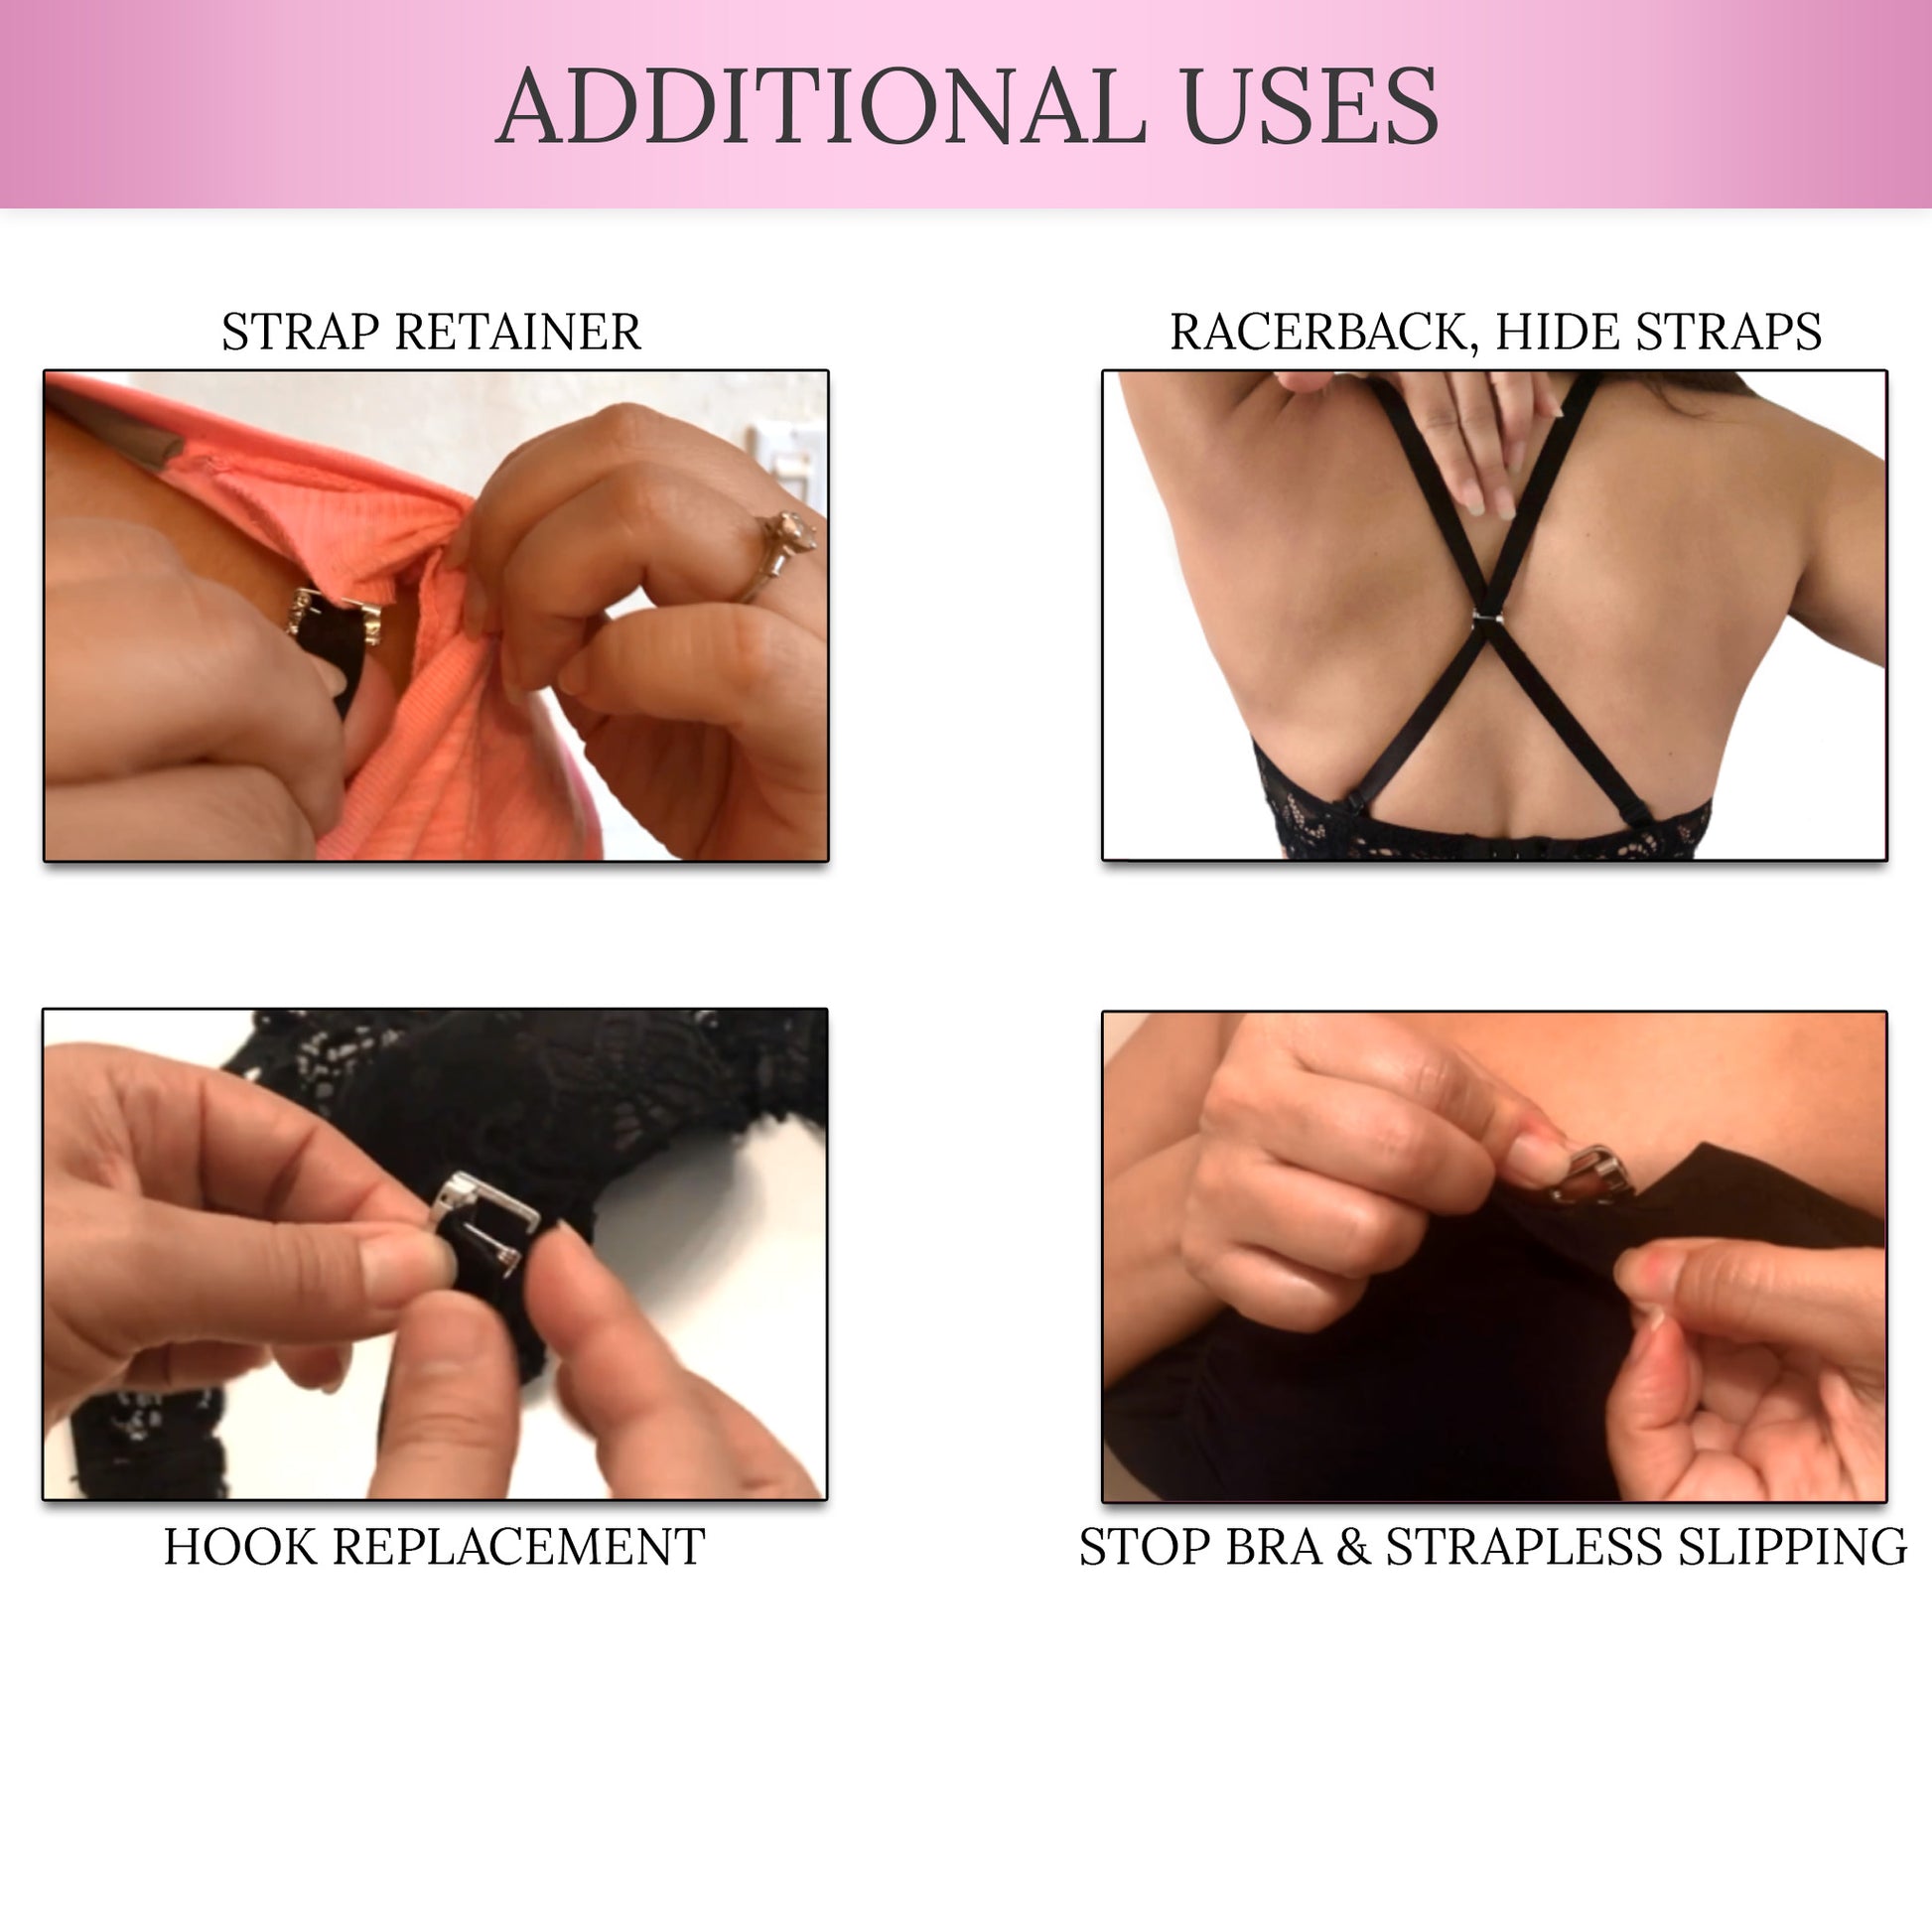 No Sew) Swimsuit Bra Hook Replacements